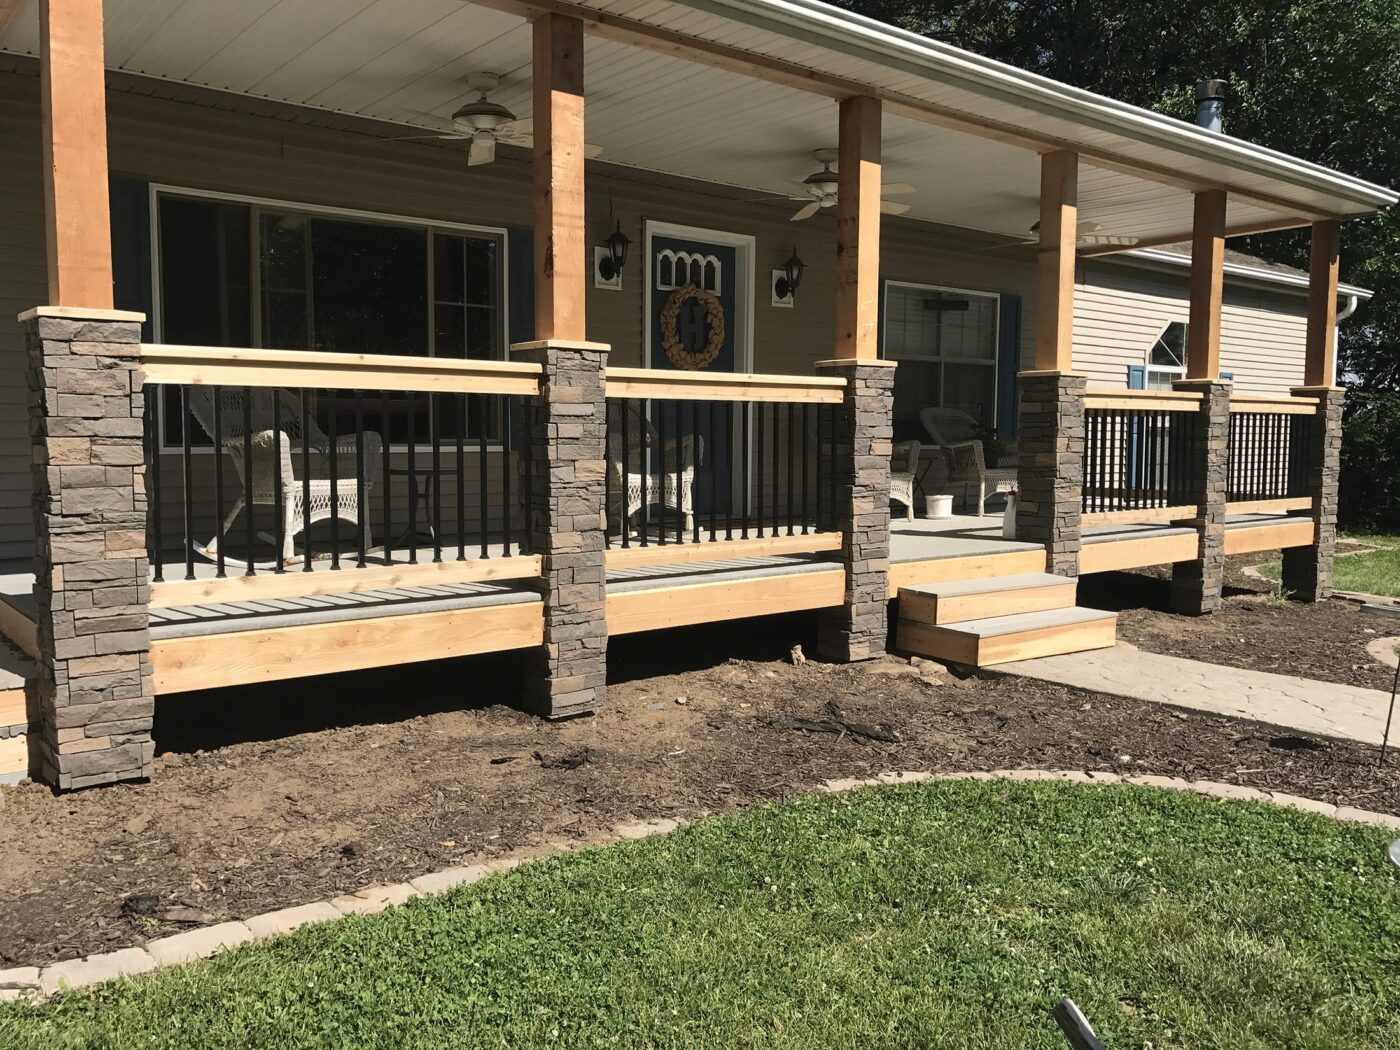 A DIY home porch columns project using our Stratford Stacked Stone panels.